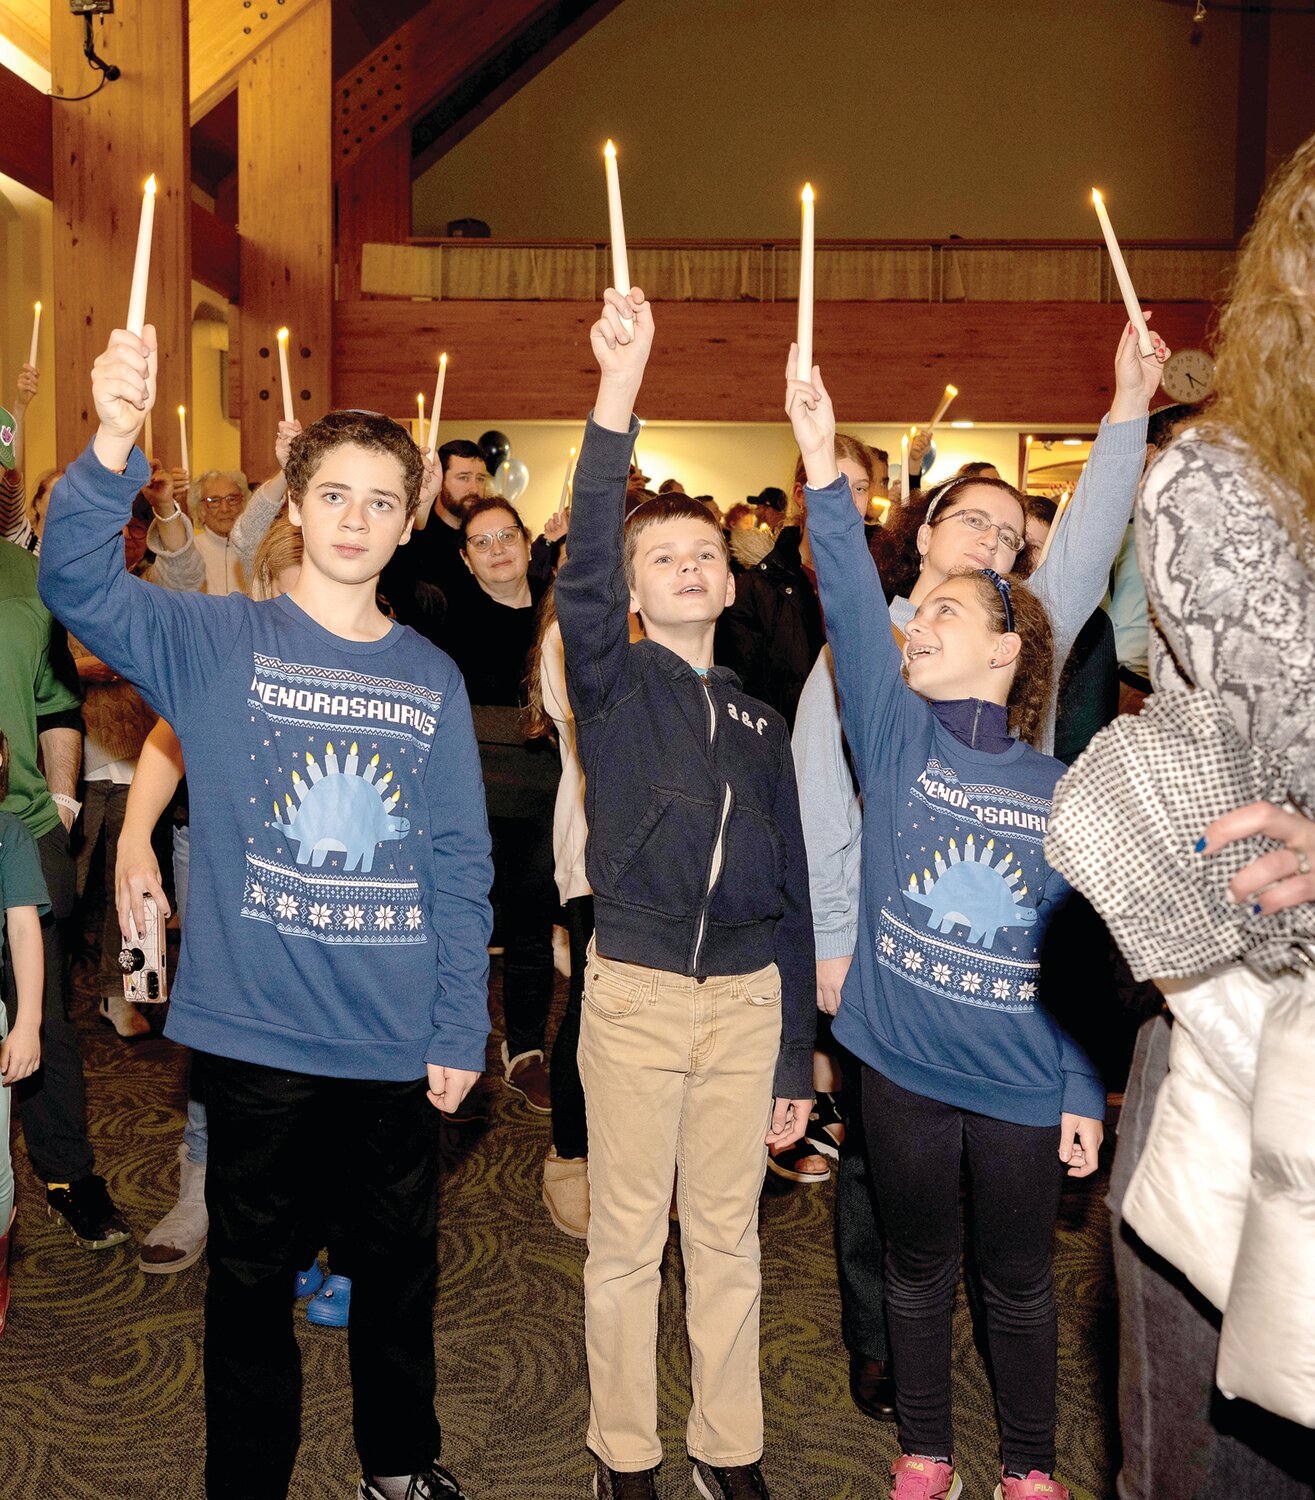 Young people lift their candles at the Family Chanukah Celebration in Newtown.